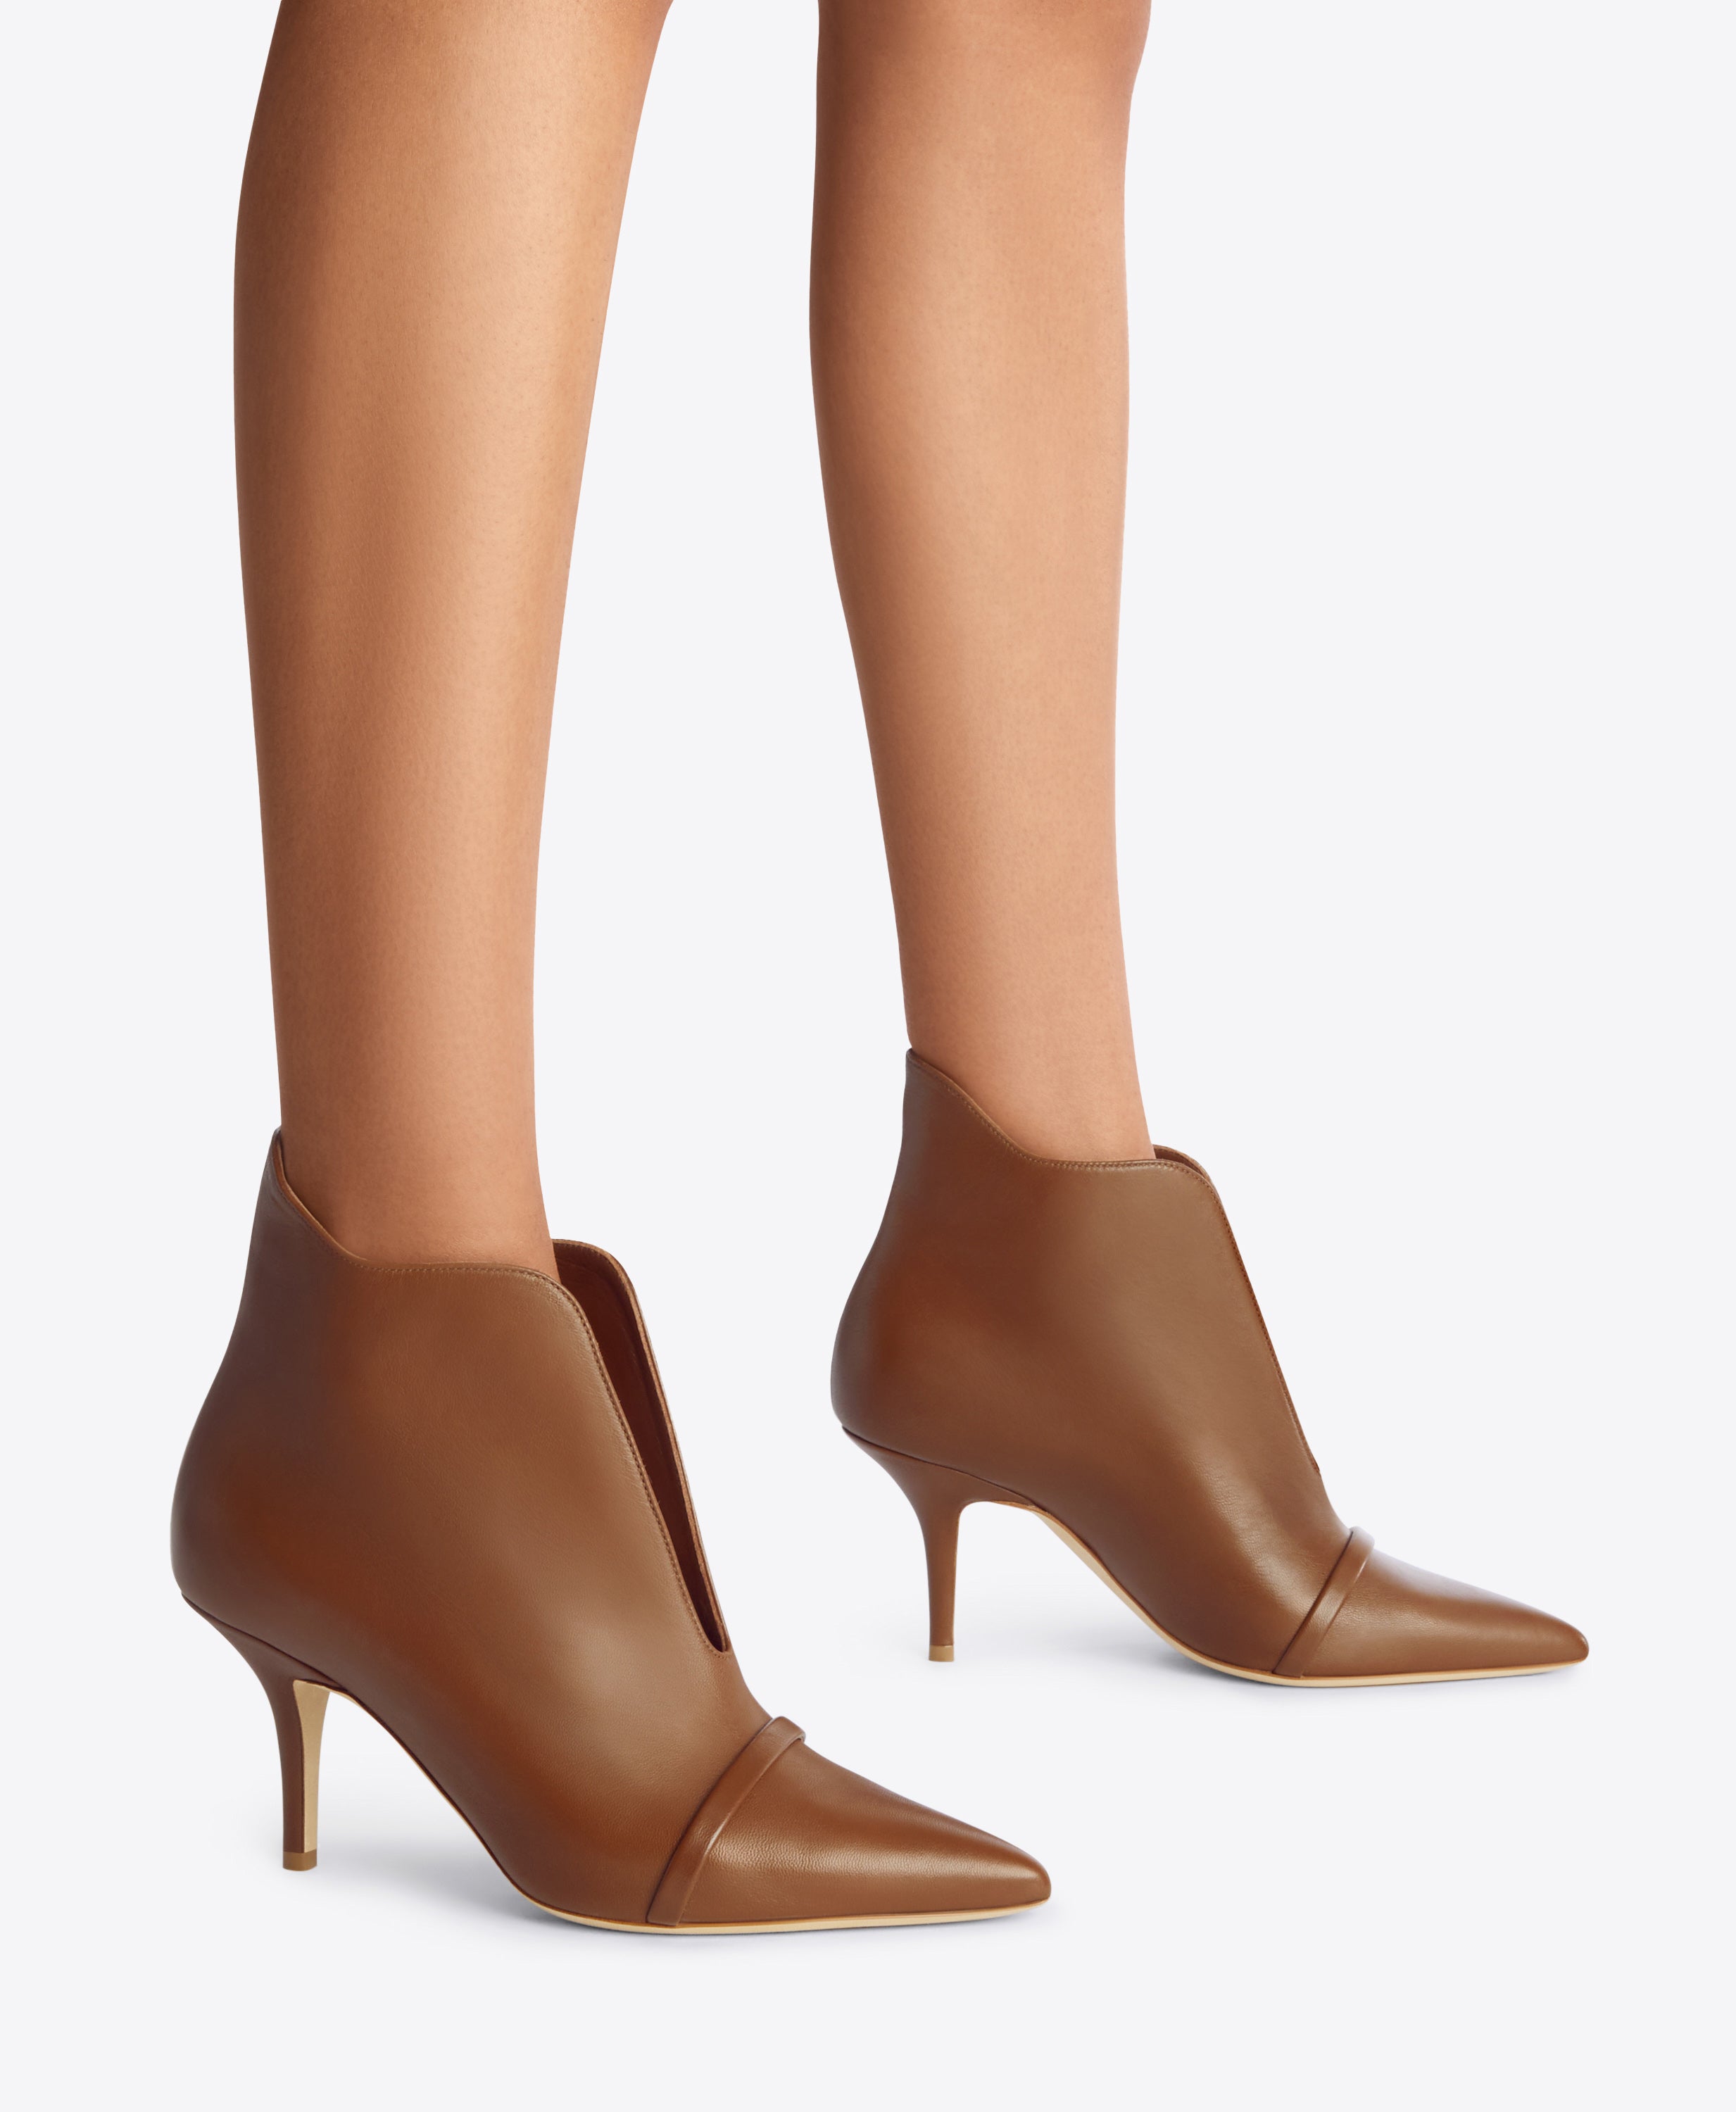 Designer Women's Boots | Ladies Boots | Malone Souliers